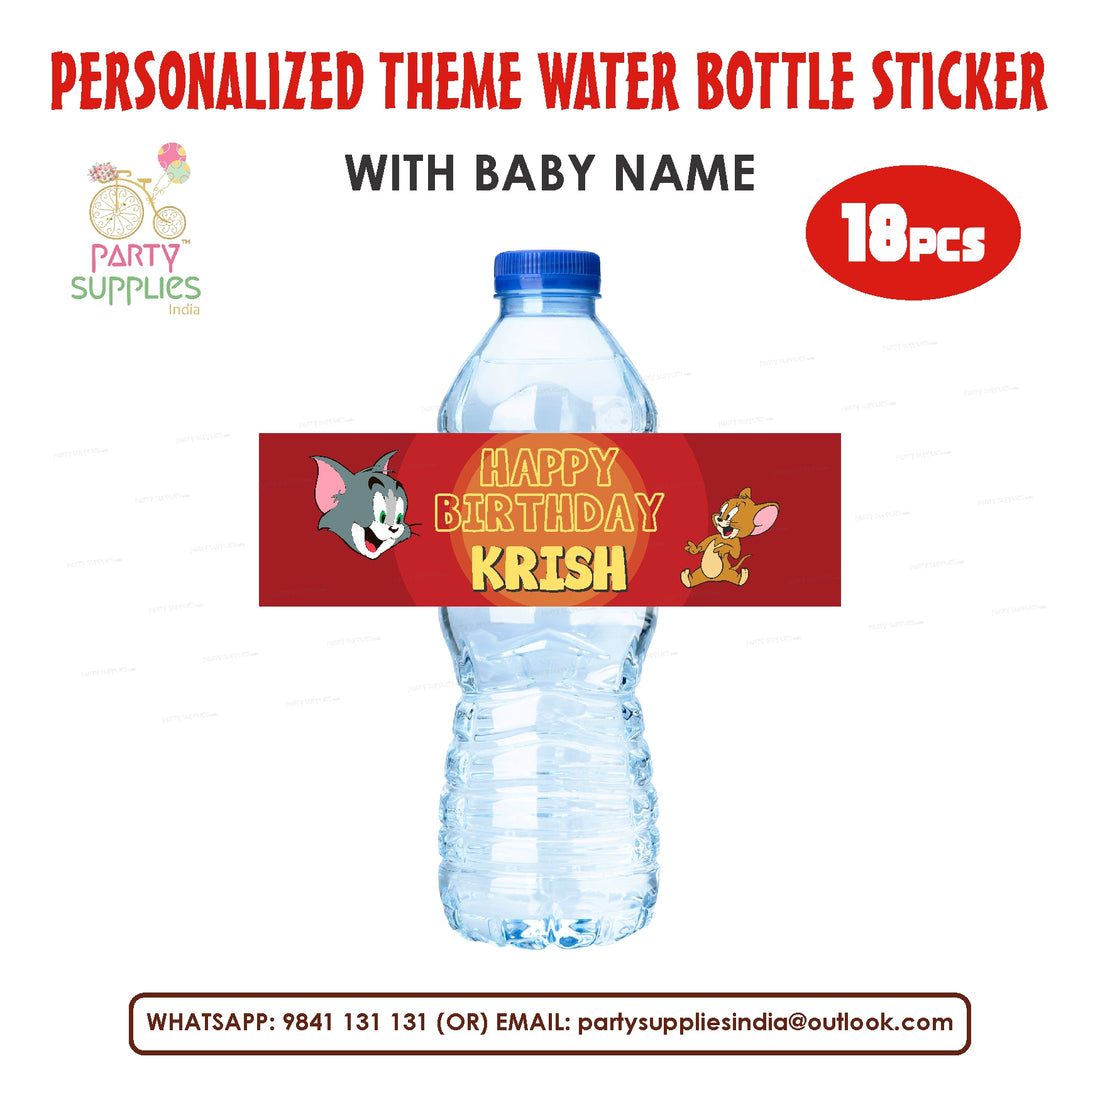 PSI Tom and Jerry Theme Water Bottle Sticker